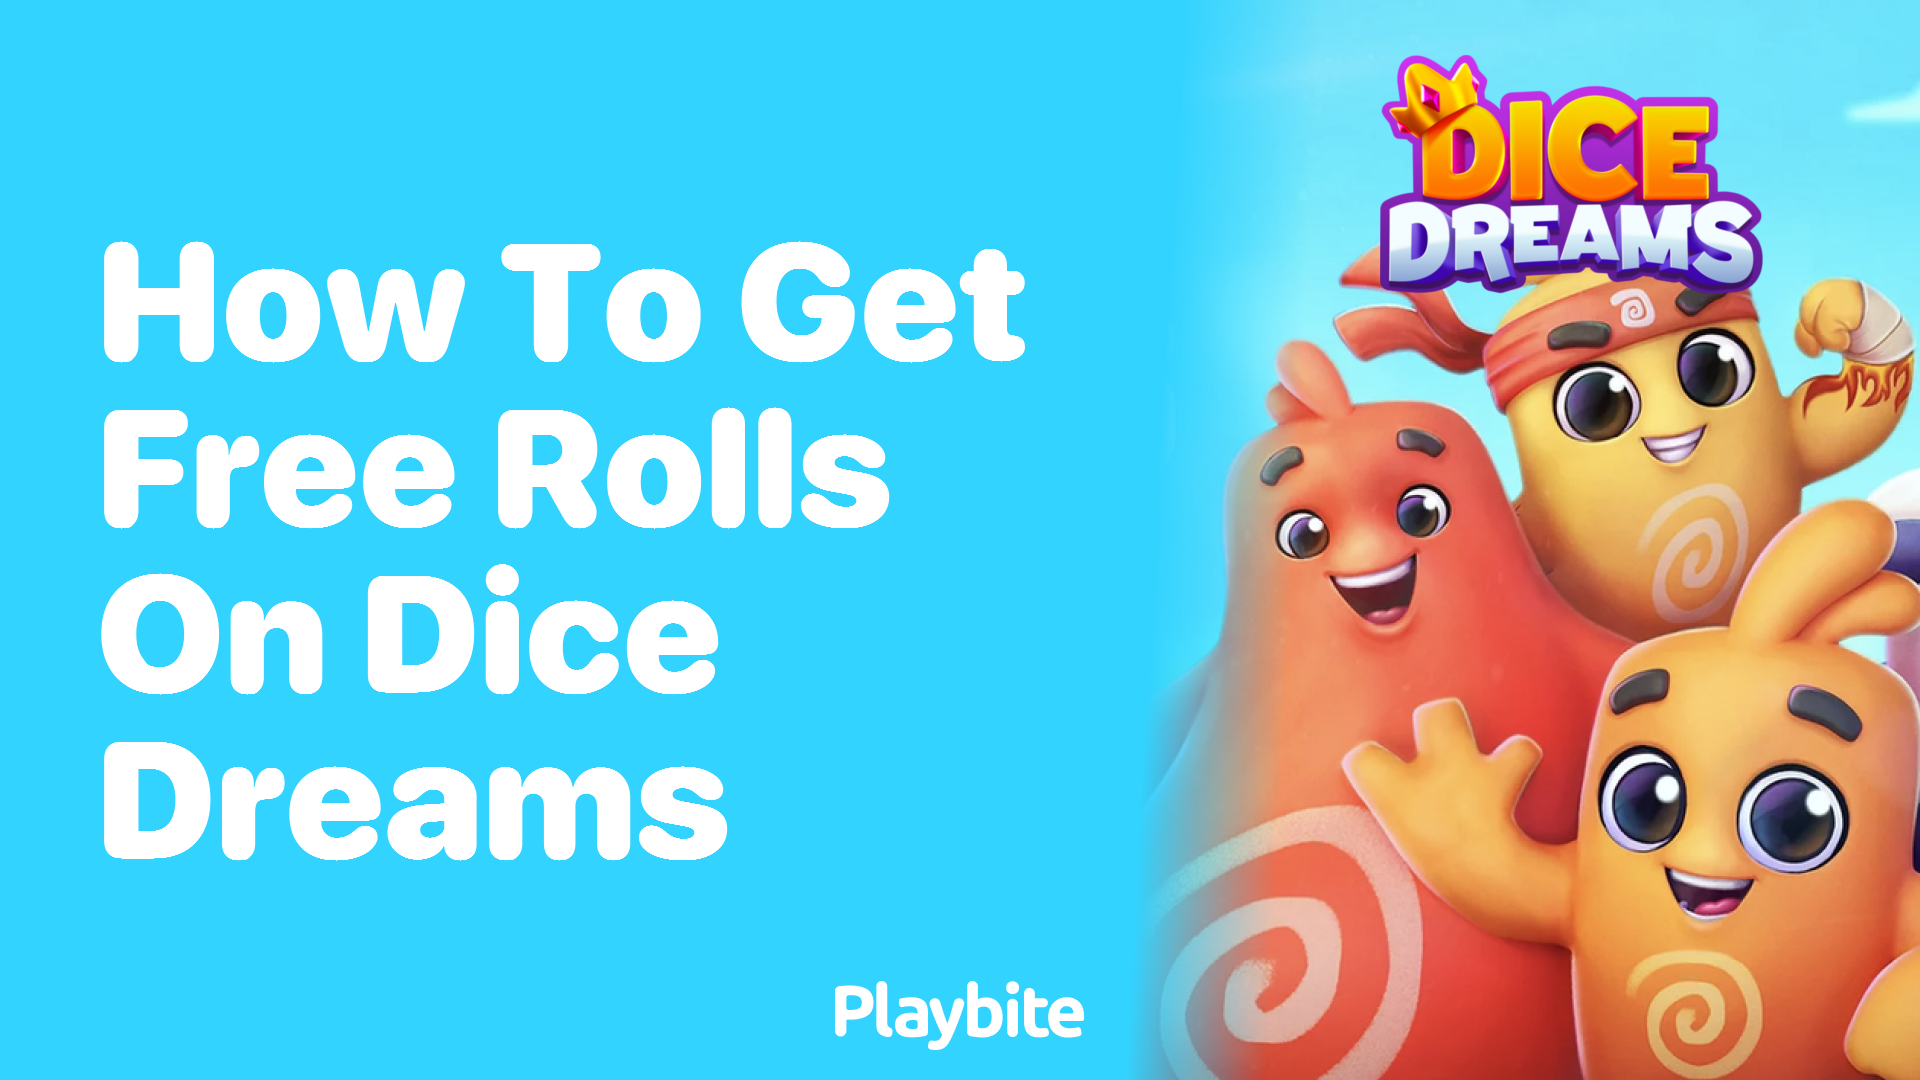 How to Get Free Rolls on Dice Dreams